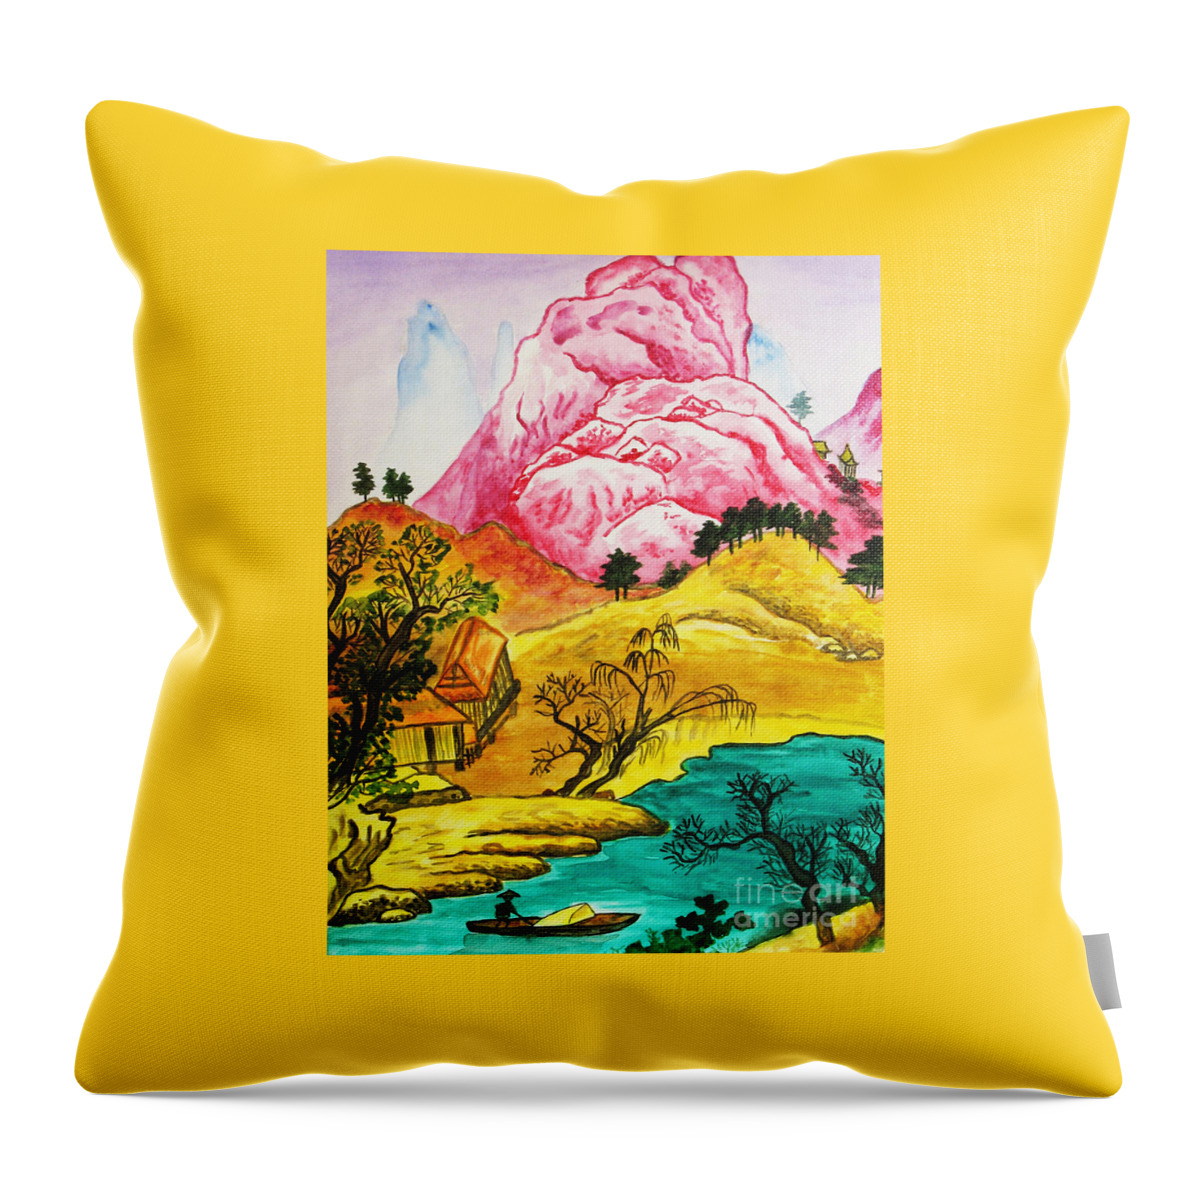 Hand Drawn Throw Pillow featuring the painting Chinese landscape by Irina Afonskaya